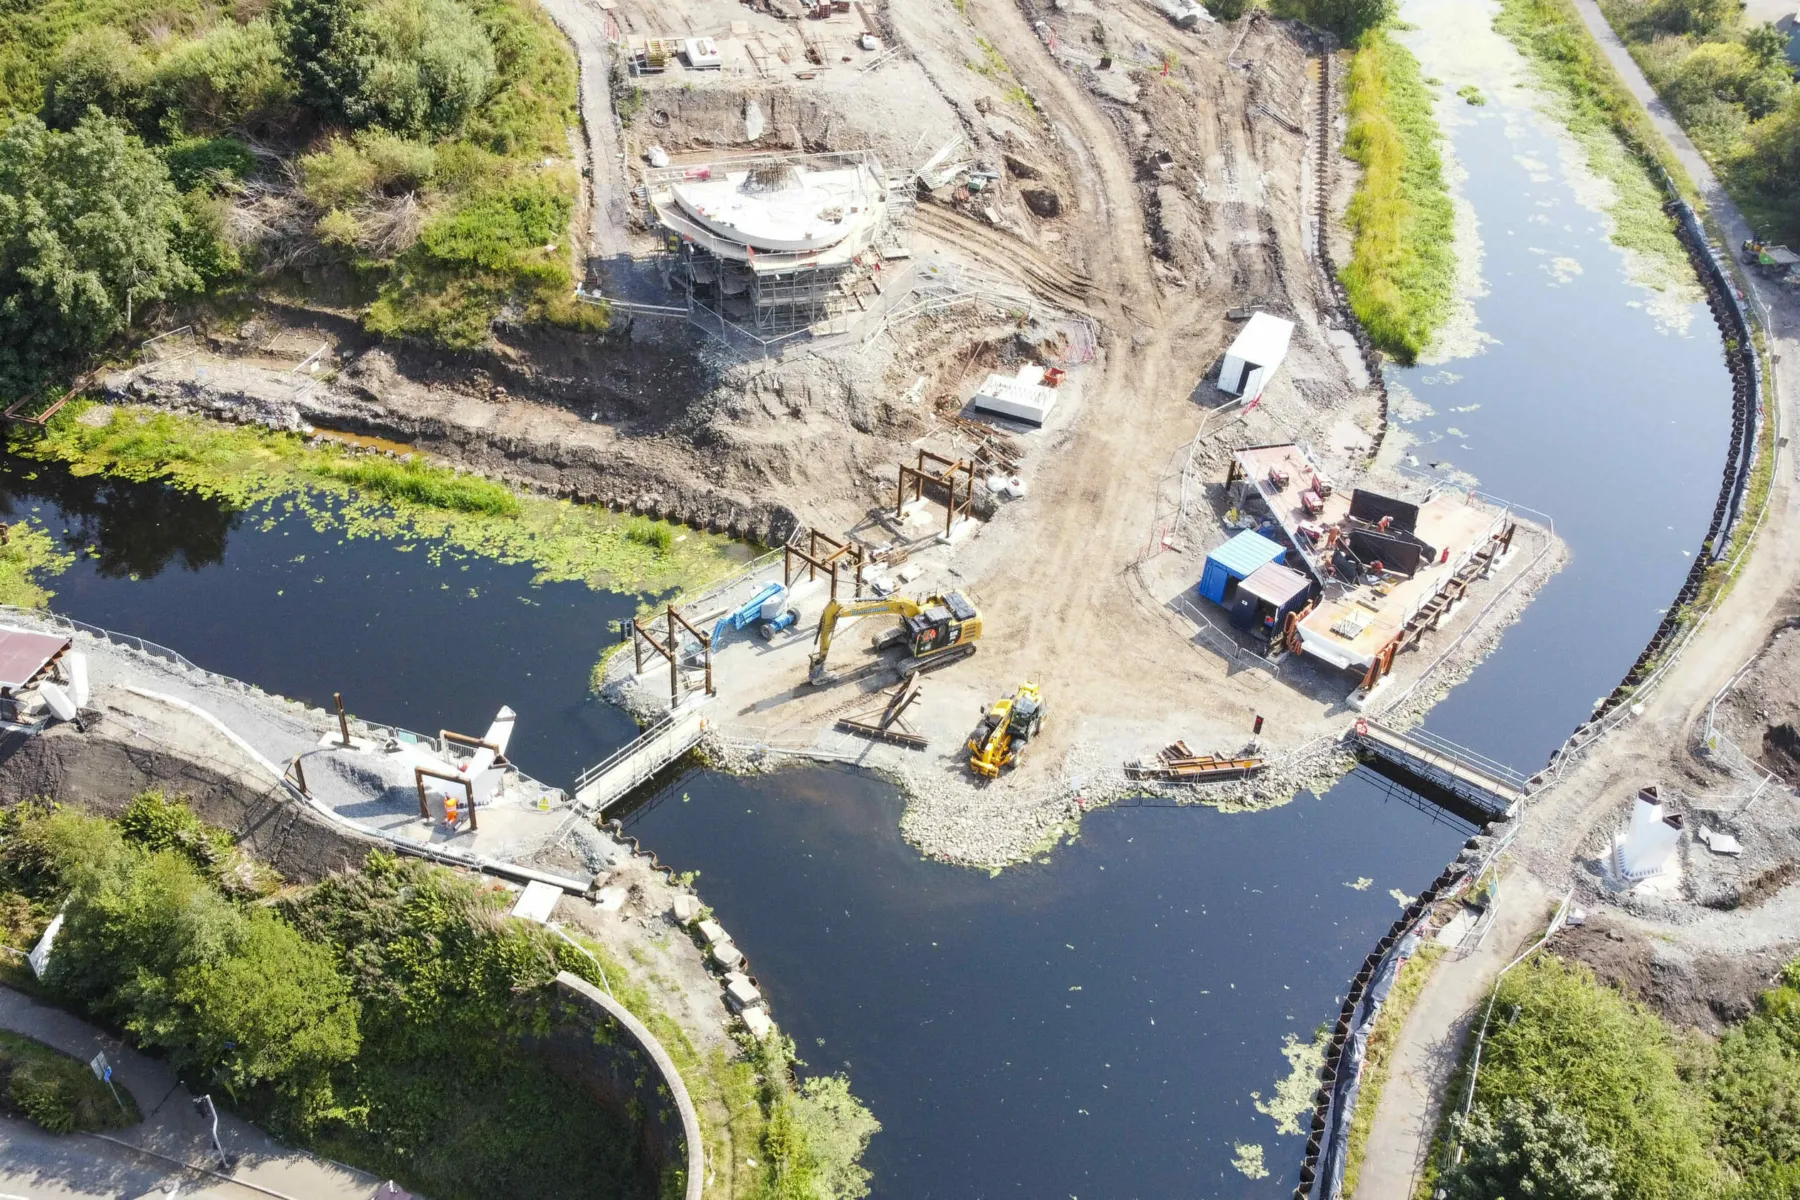 Canal bridge under construction at the site of the Stockingfield Bridge, Glasgow. The early stages of the tower are in progress. Gangways are show across two points in the canal to allow access and boats to pass. Earthworks are underway.